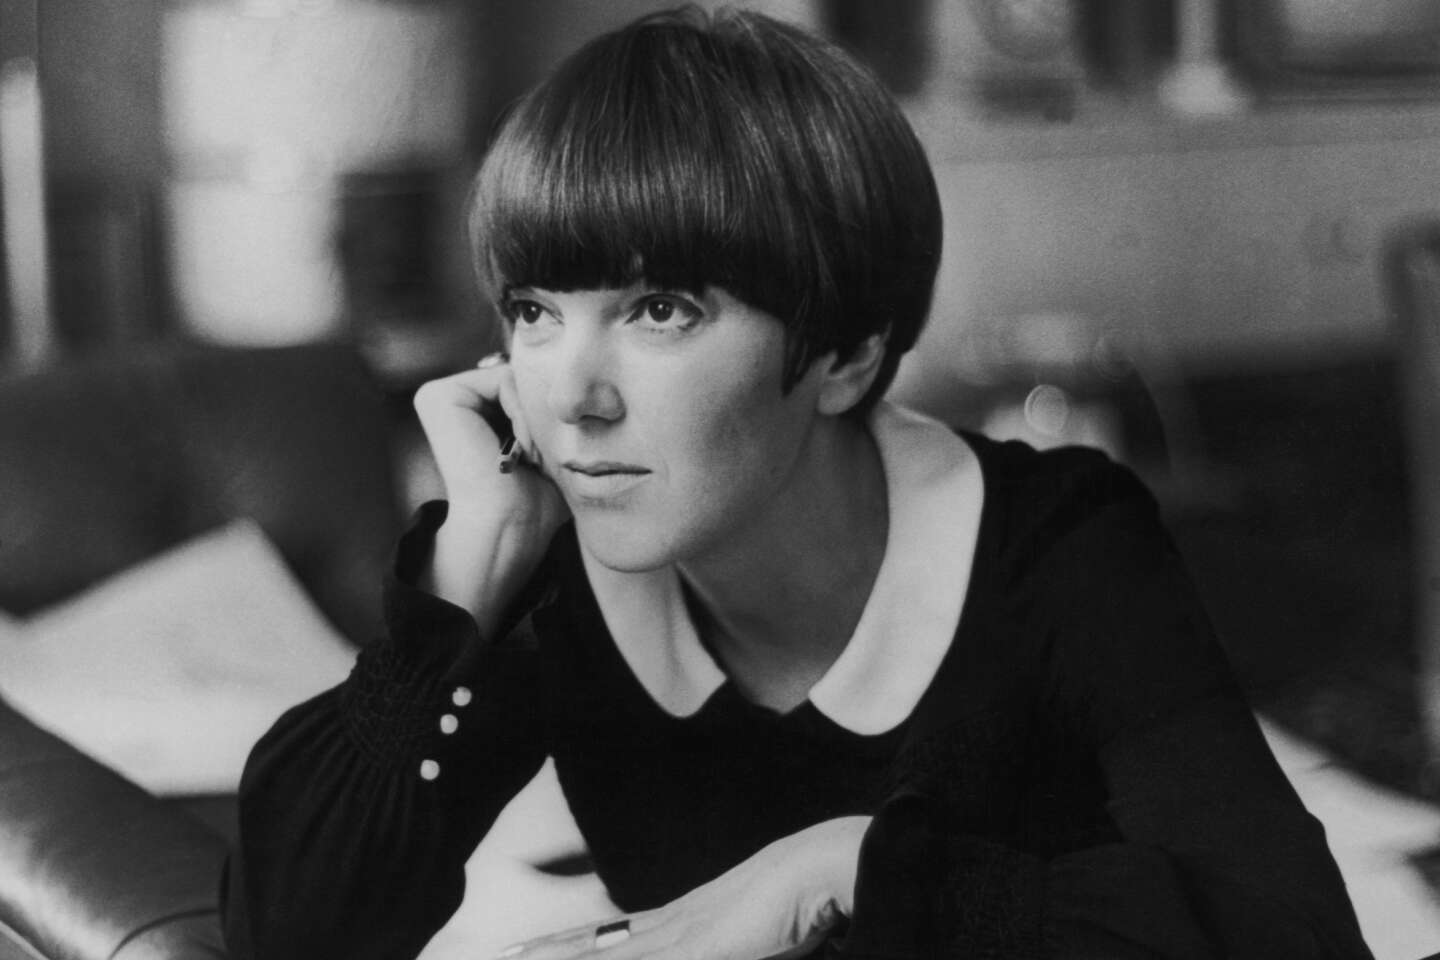 Mary Quant, designer who popularized the miniskirt, has died